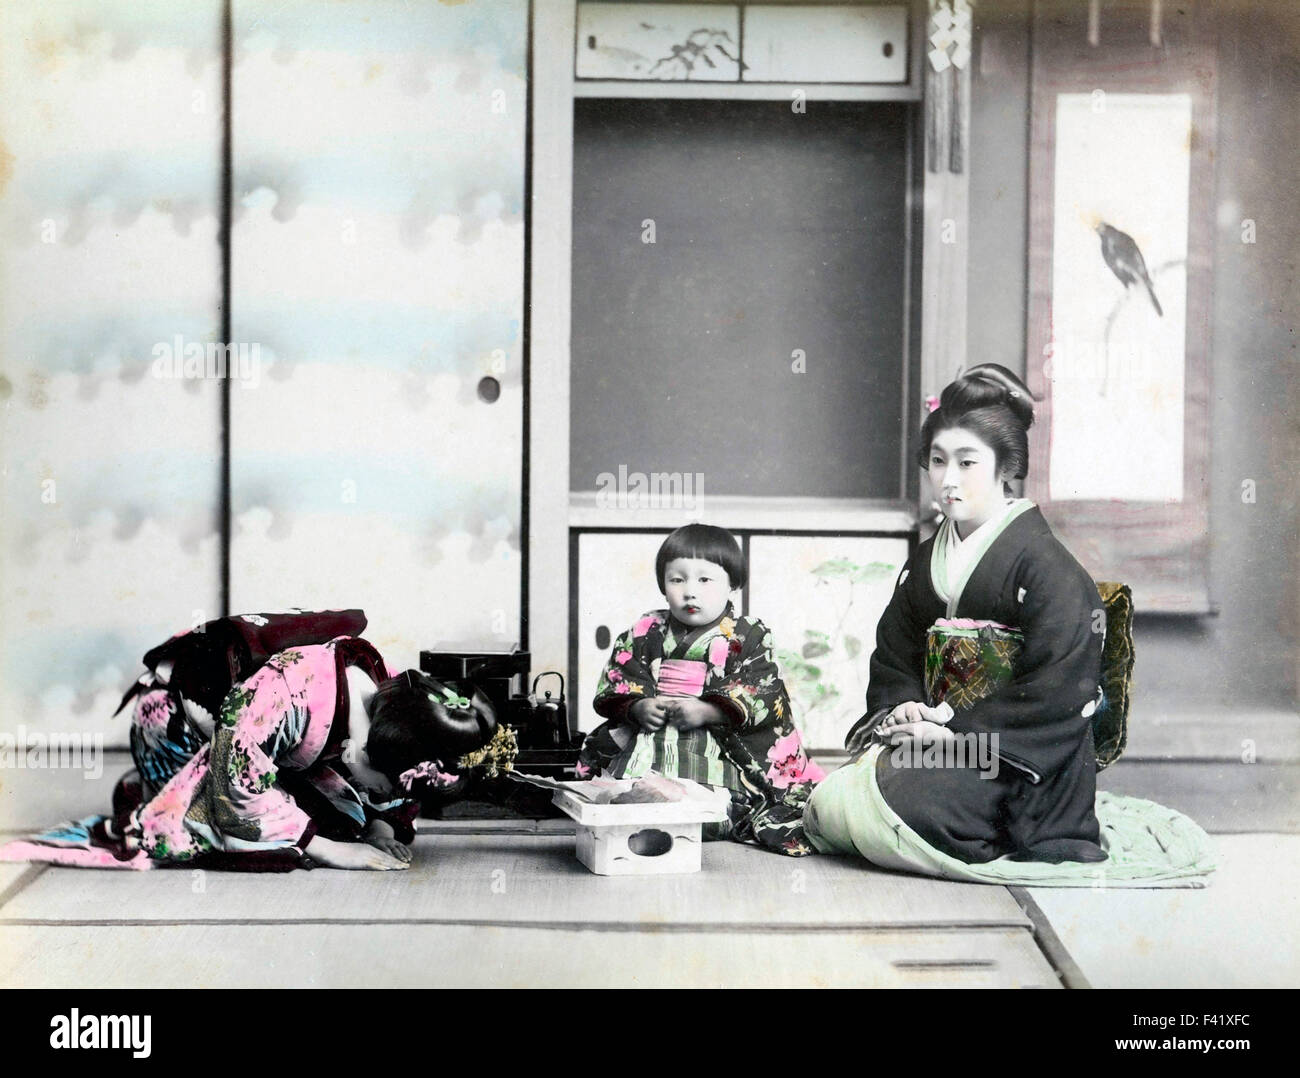 Two women with child, Japan Stock Photo